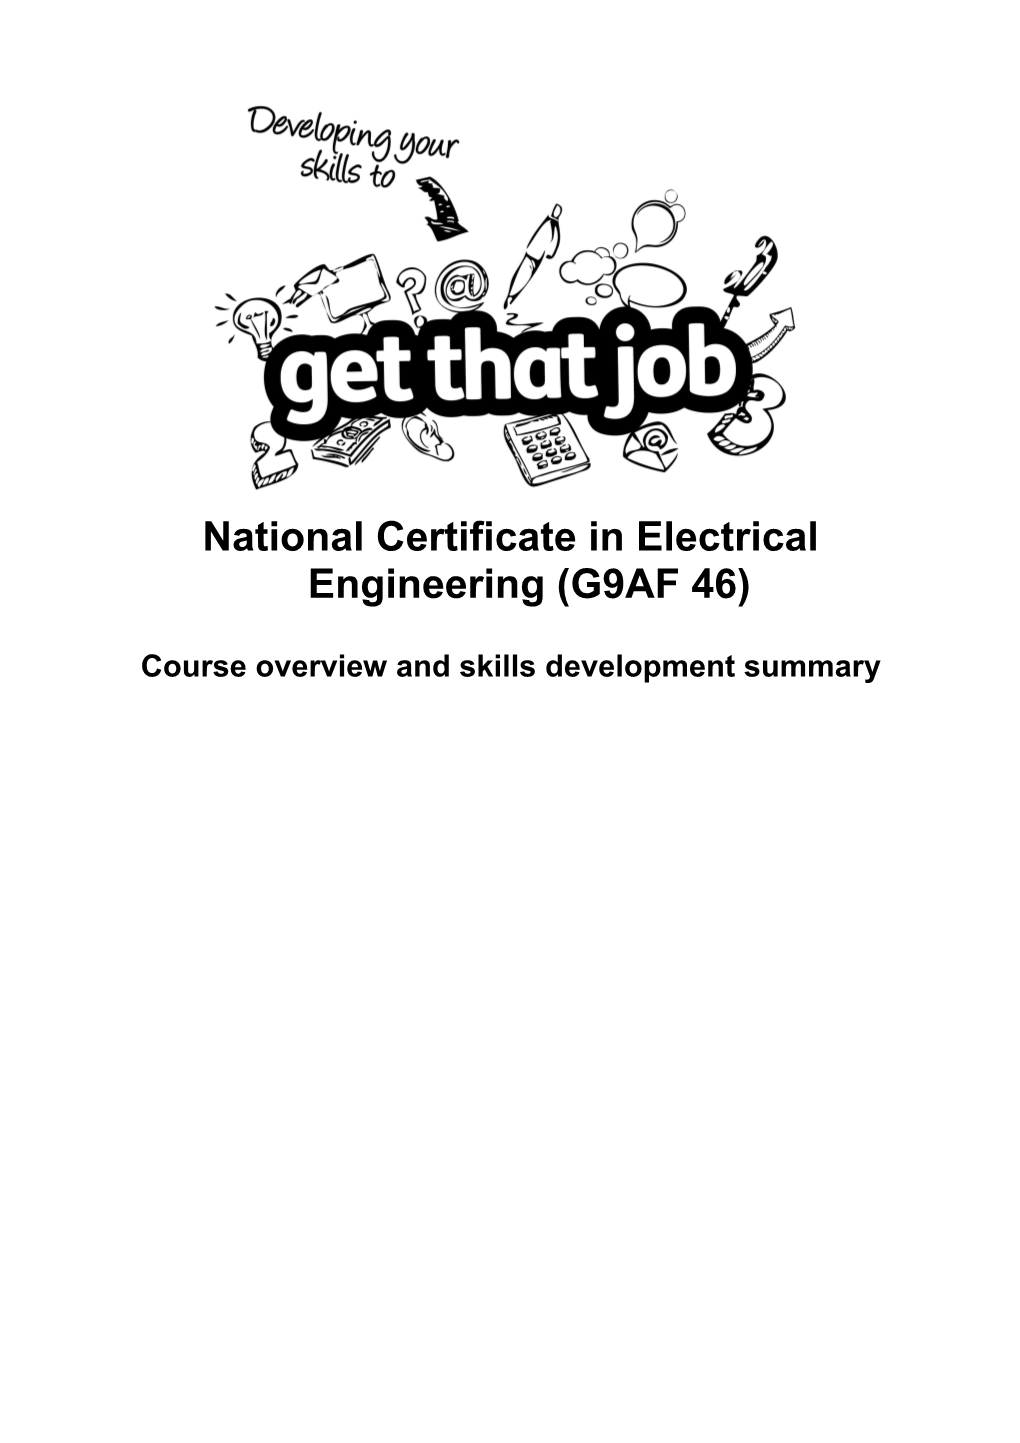 National Certificate in Electrical Engineering (G9AF 46)